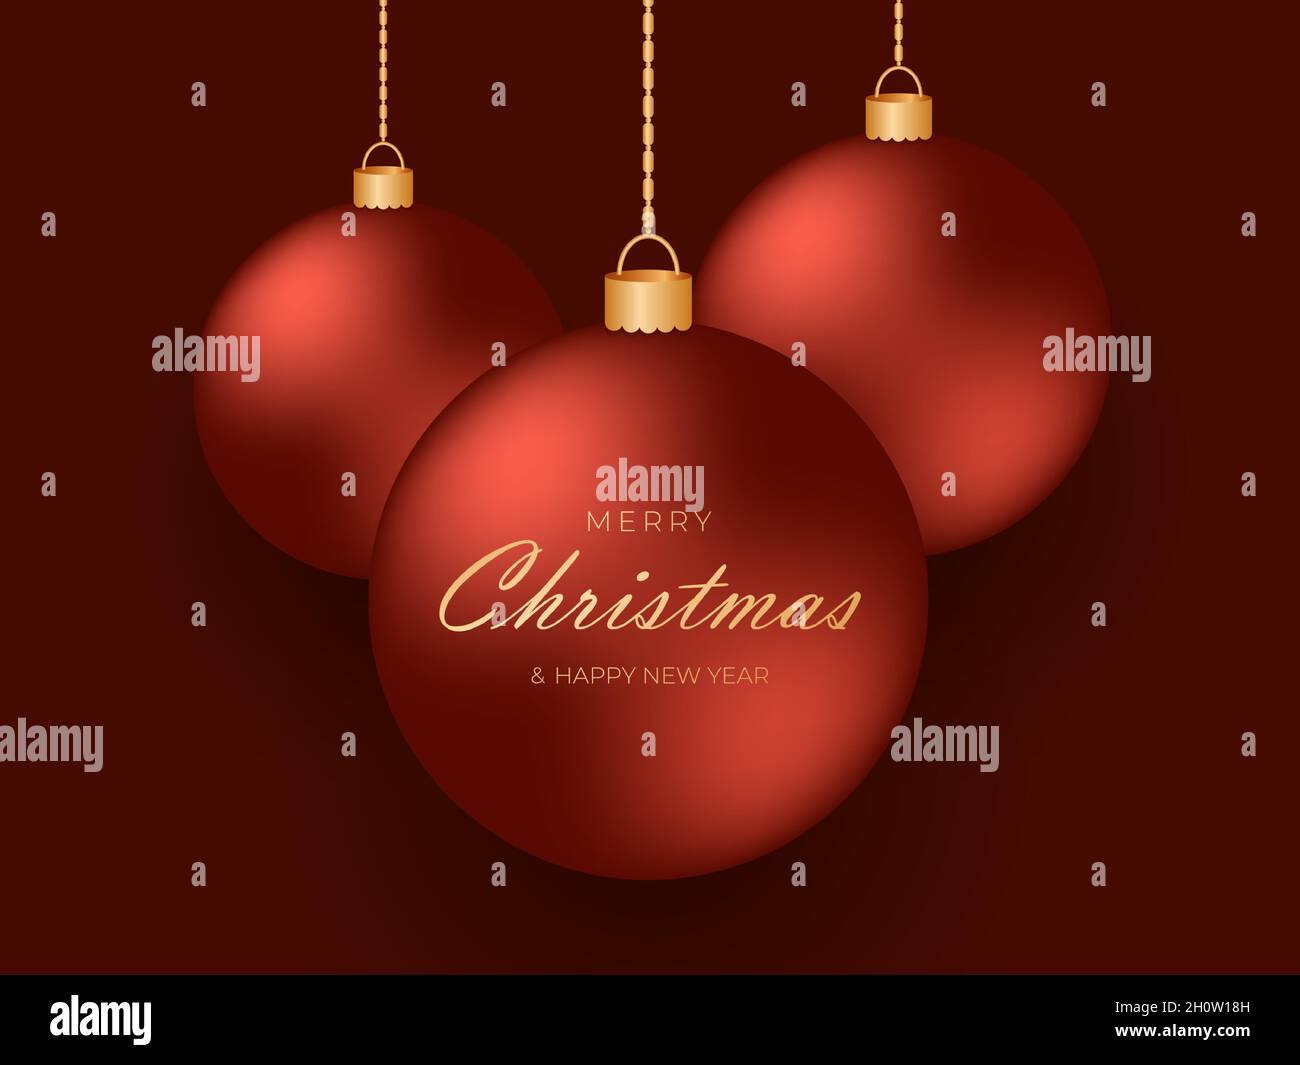 Red festive christmas balls hanging on gold chains on a dark red background Stock Vector